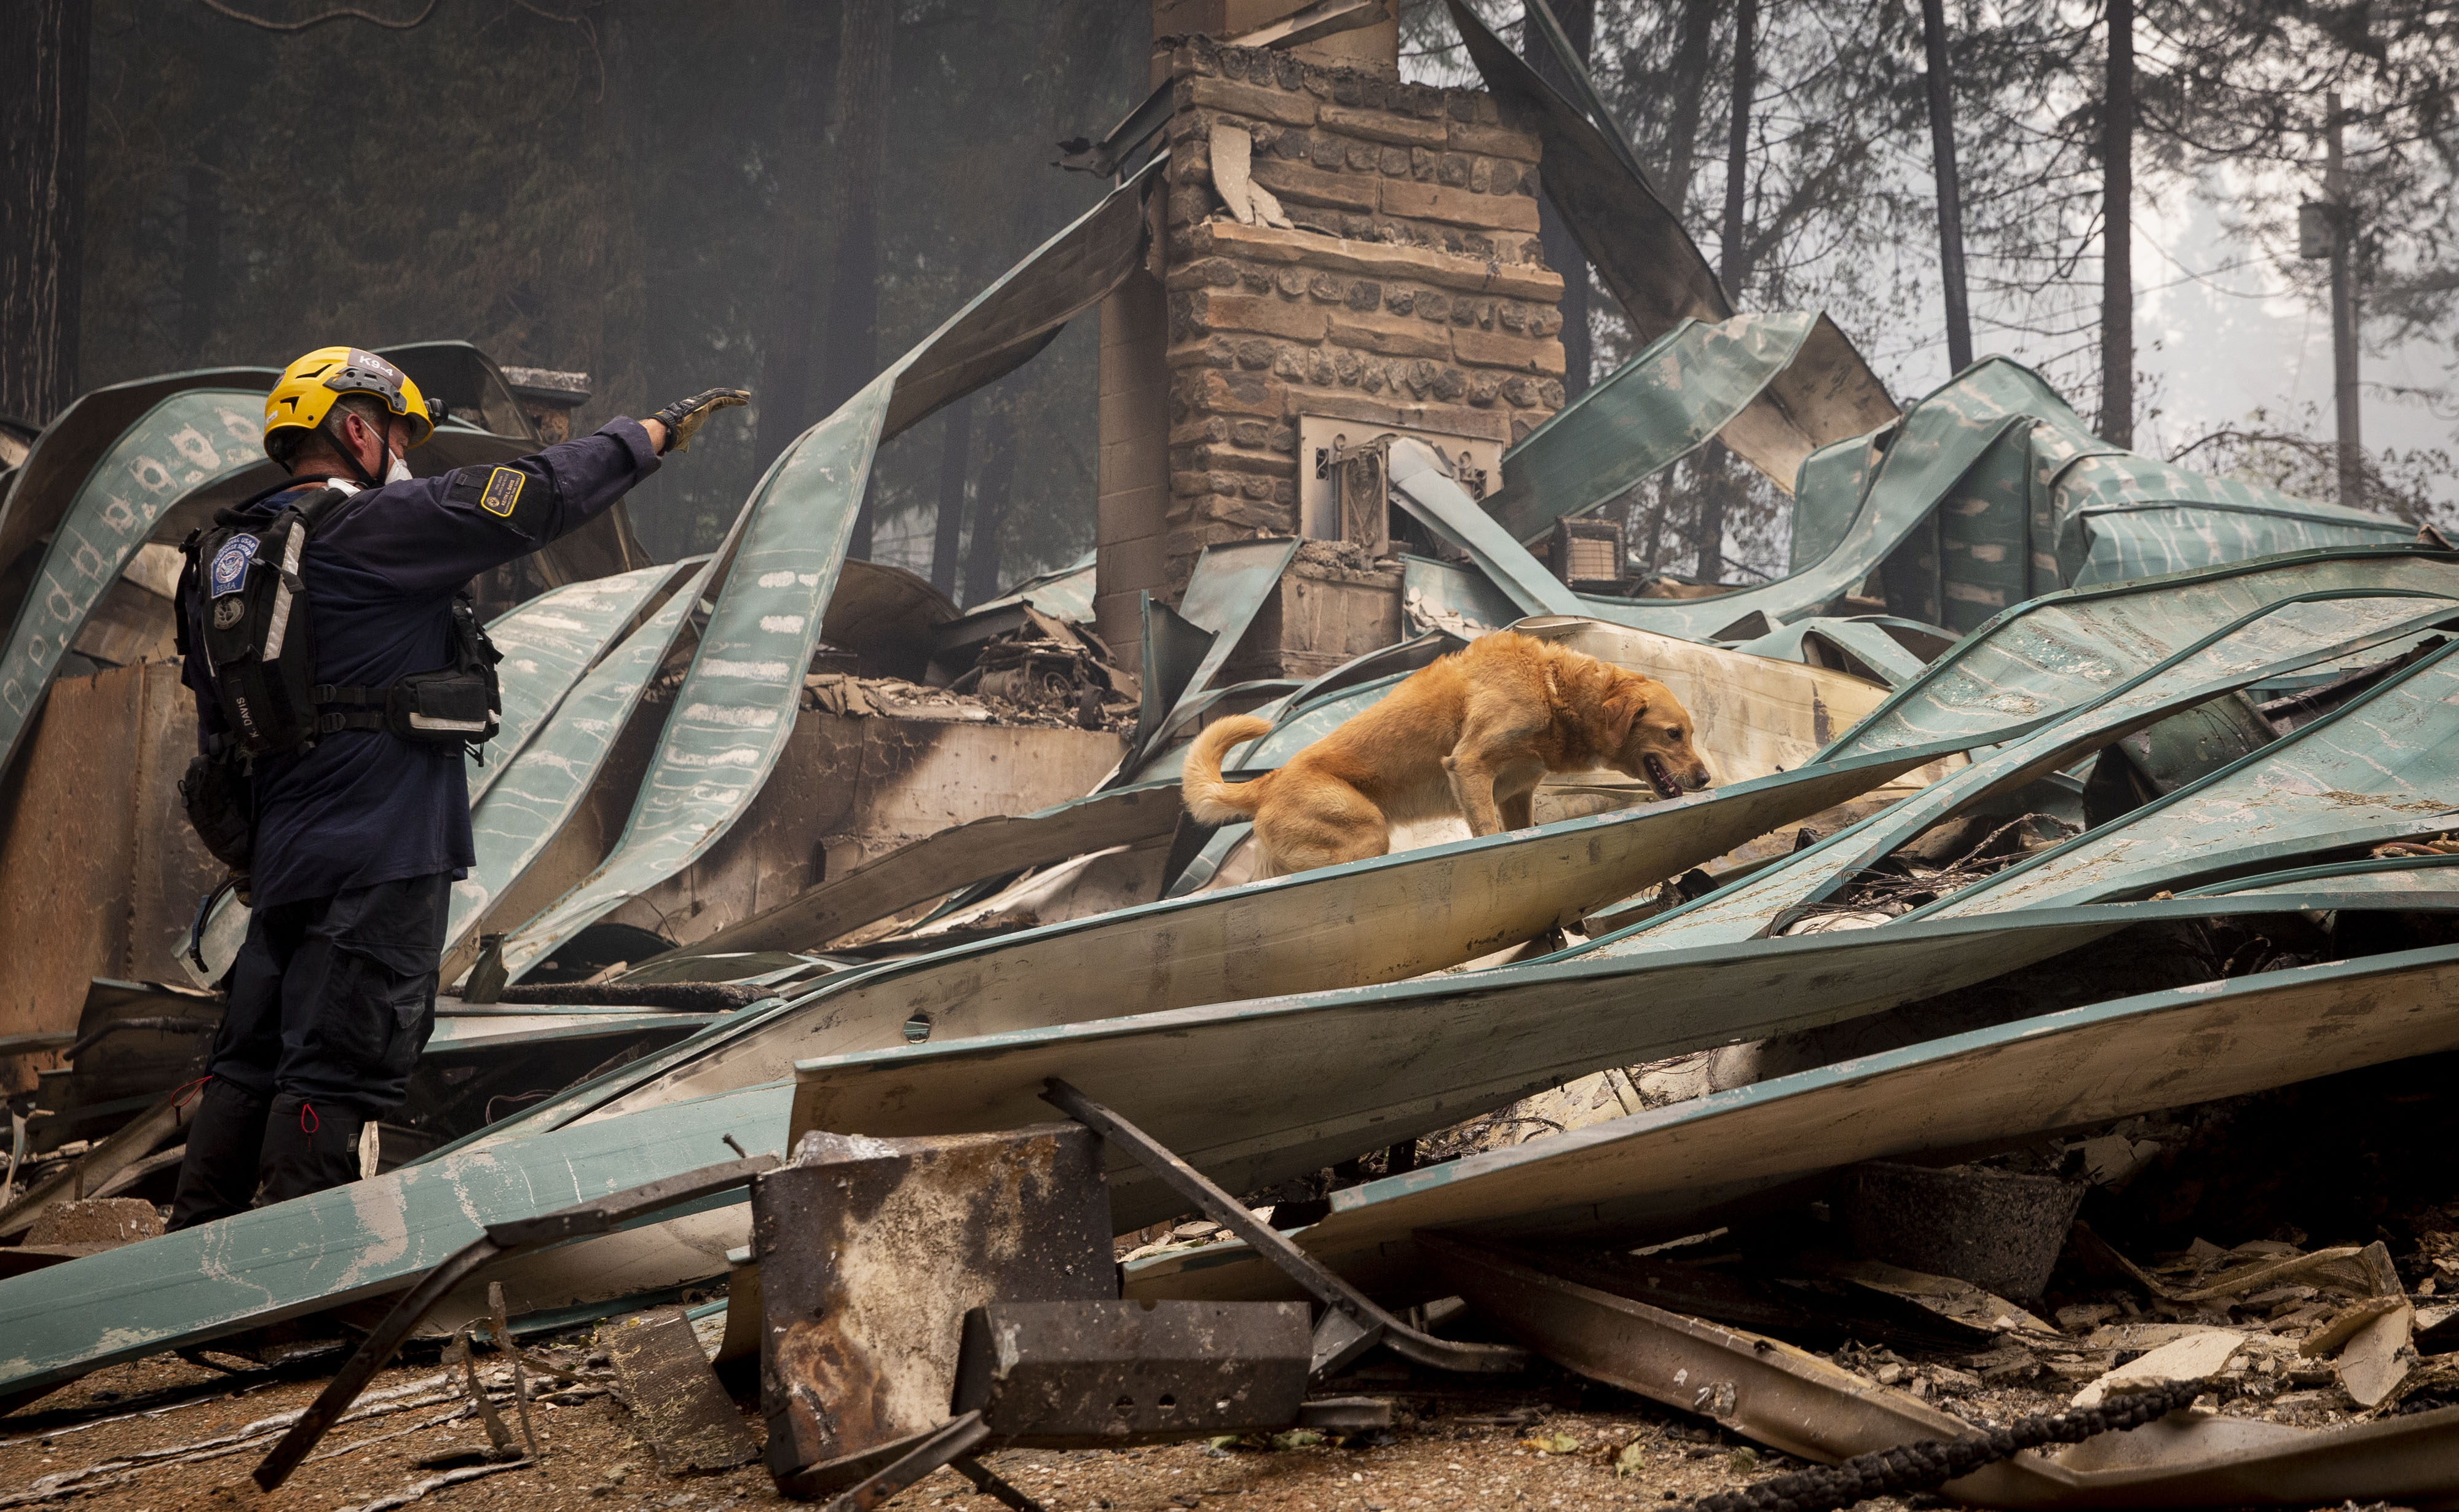 Oregon wildfire near Eugene destroys at least 500 homes, structures; 8